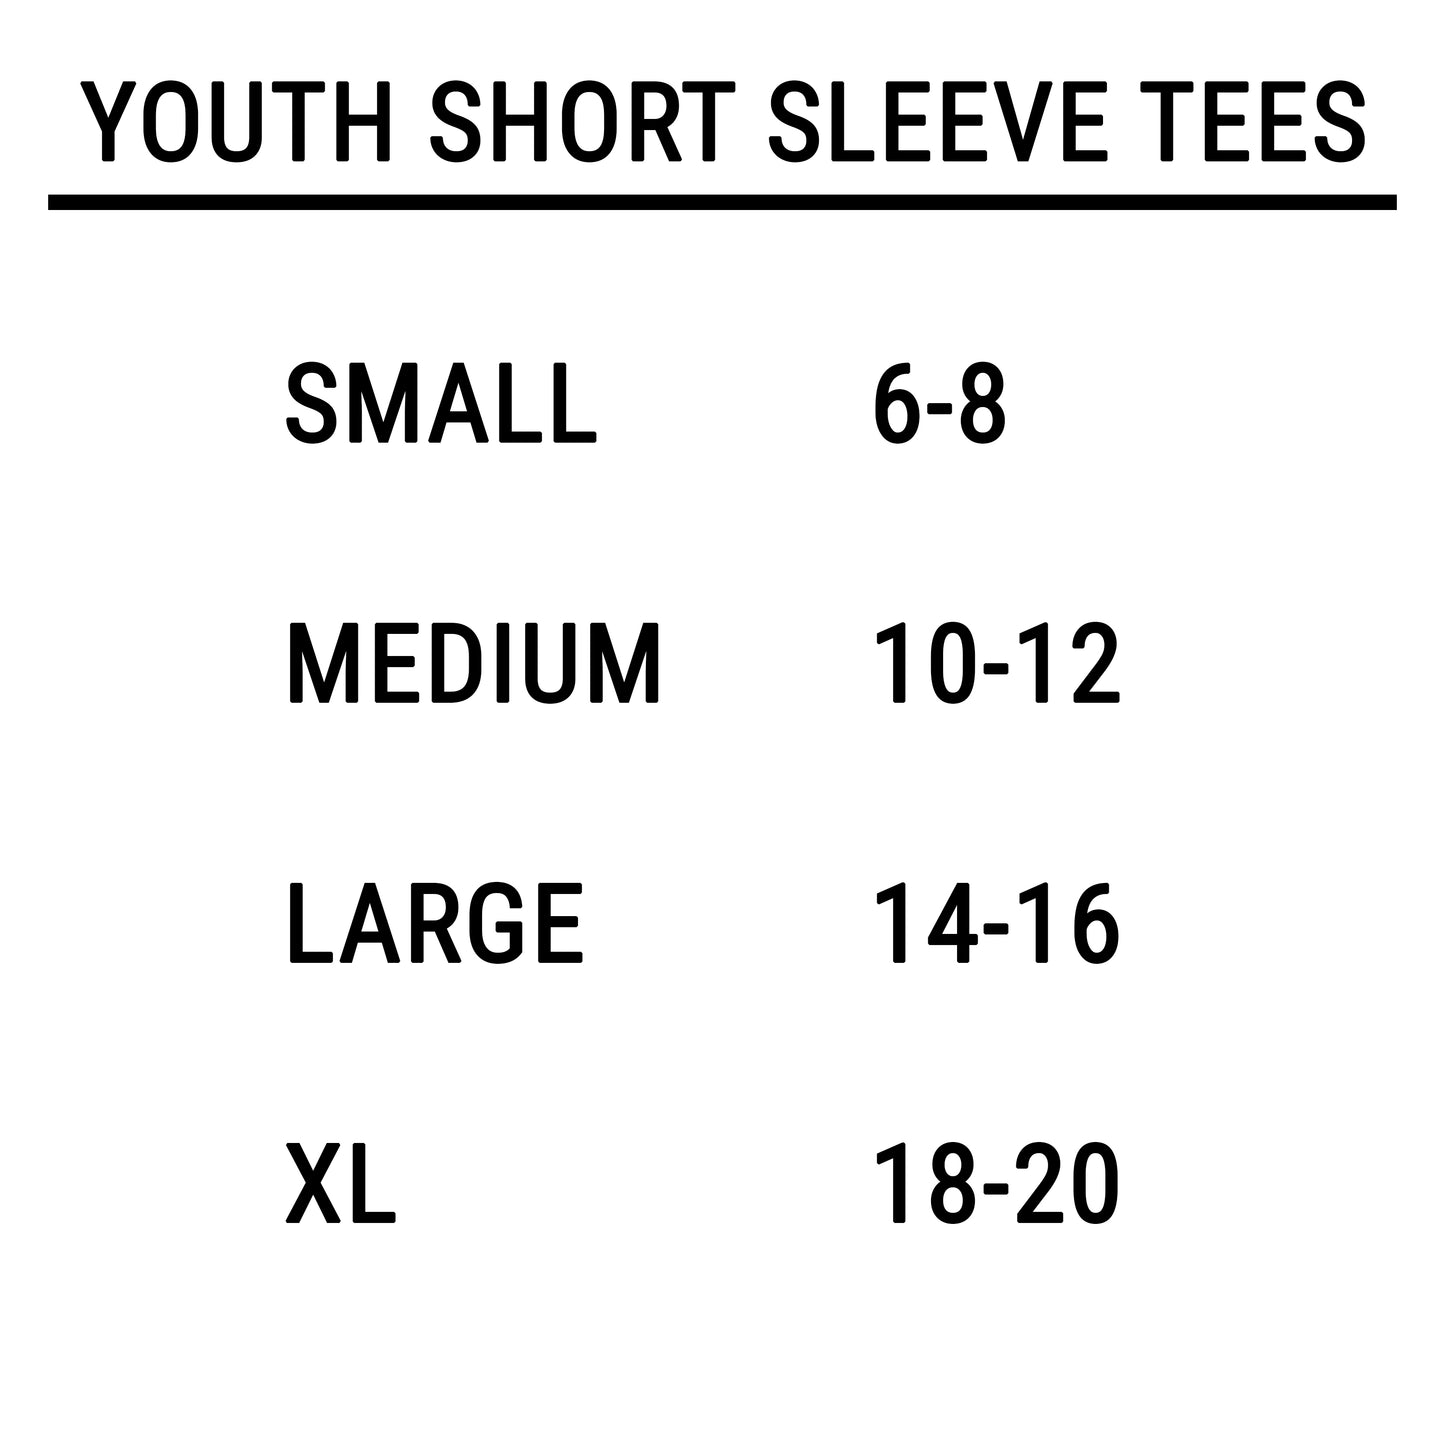 Retro Wild And Free Cowgirl | Youth Short Sleeve Graphic Tee